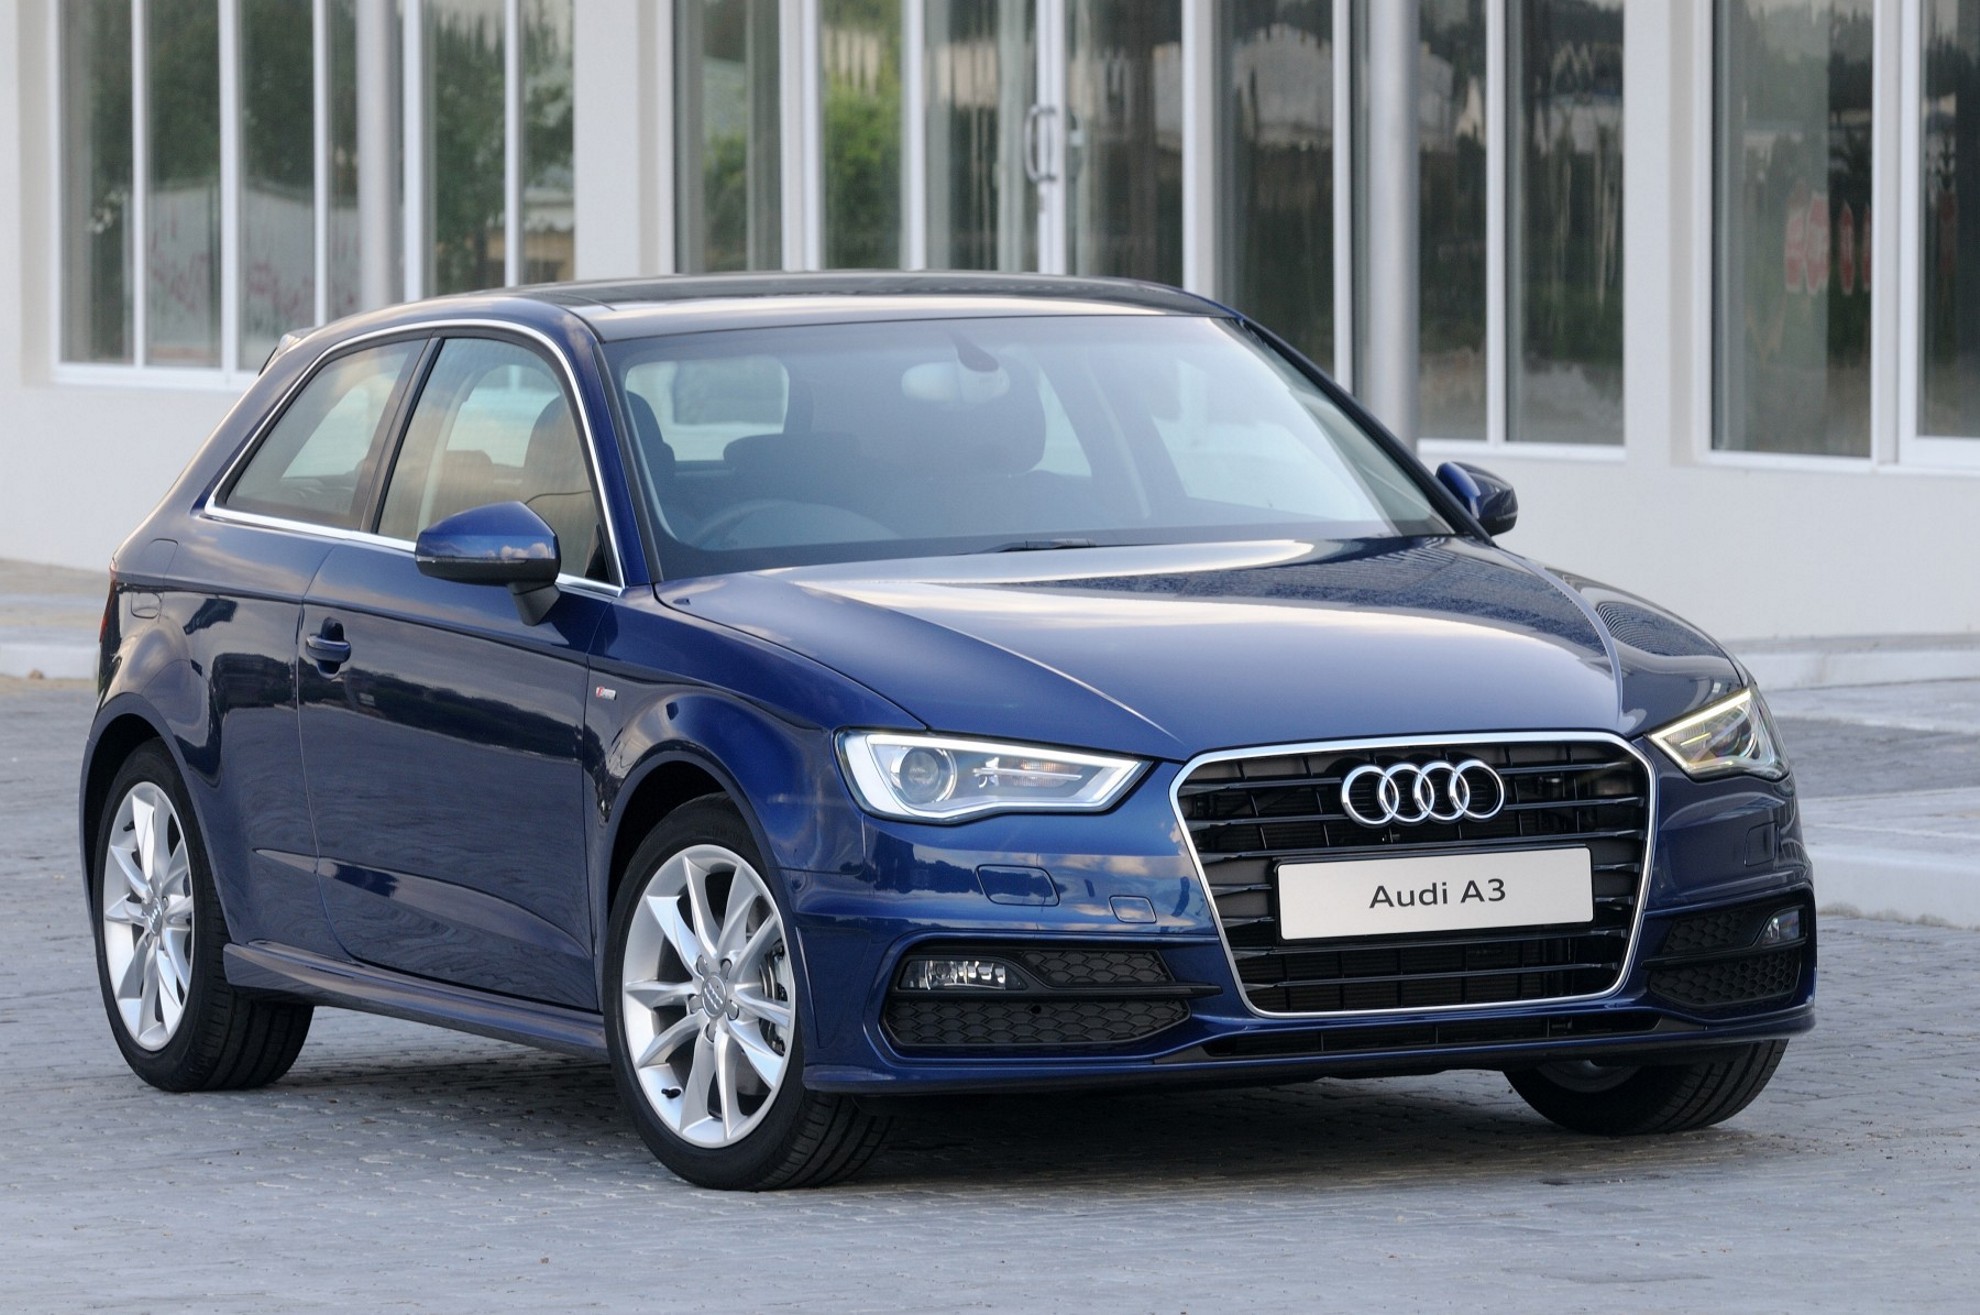 Audi 2012 South Africa Sales a Record Year